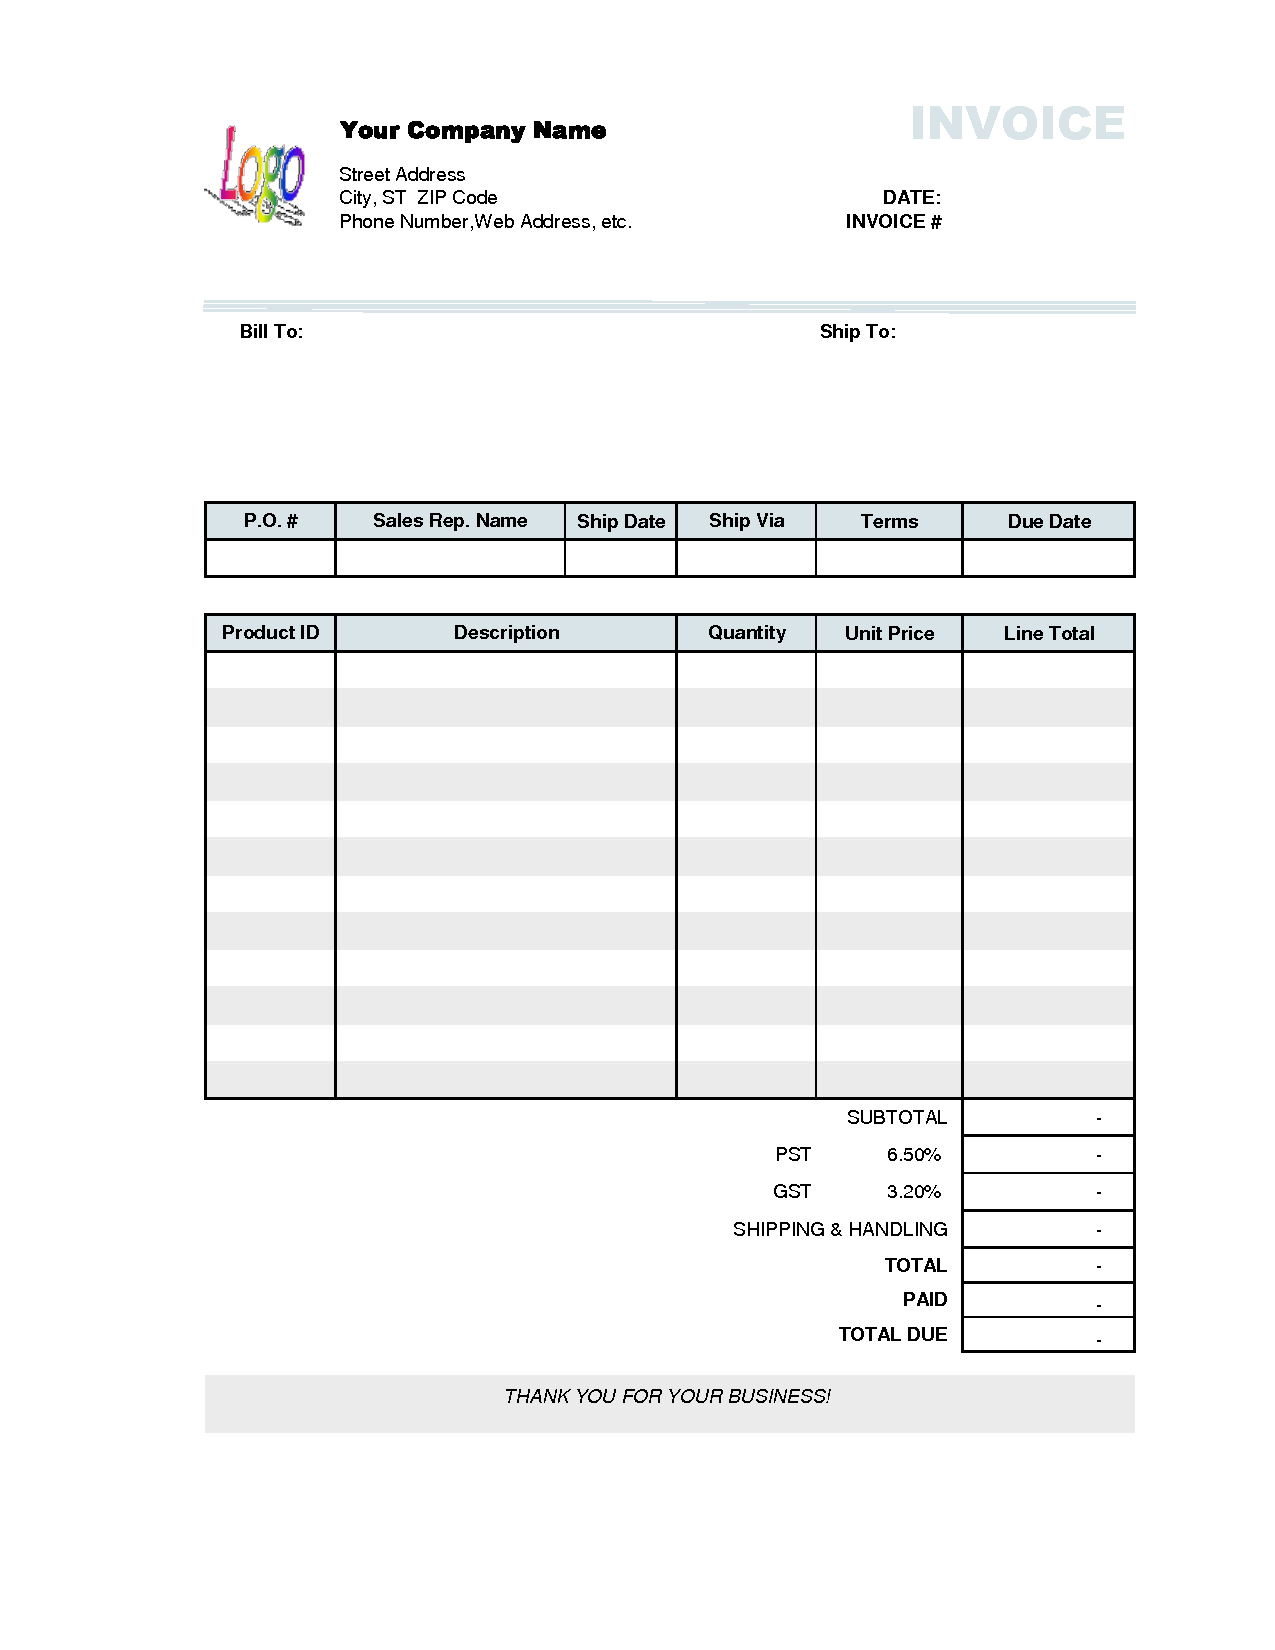 Word sales receipt templates are available in Word Format and can 